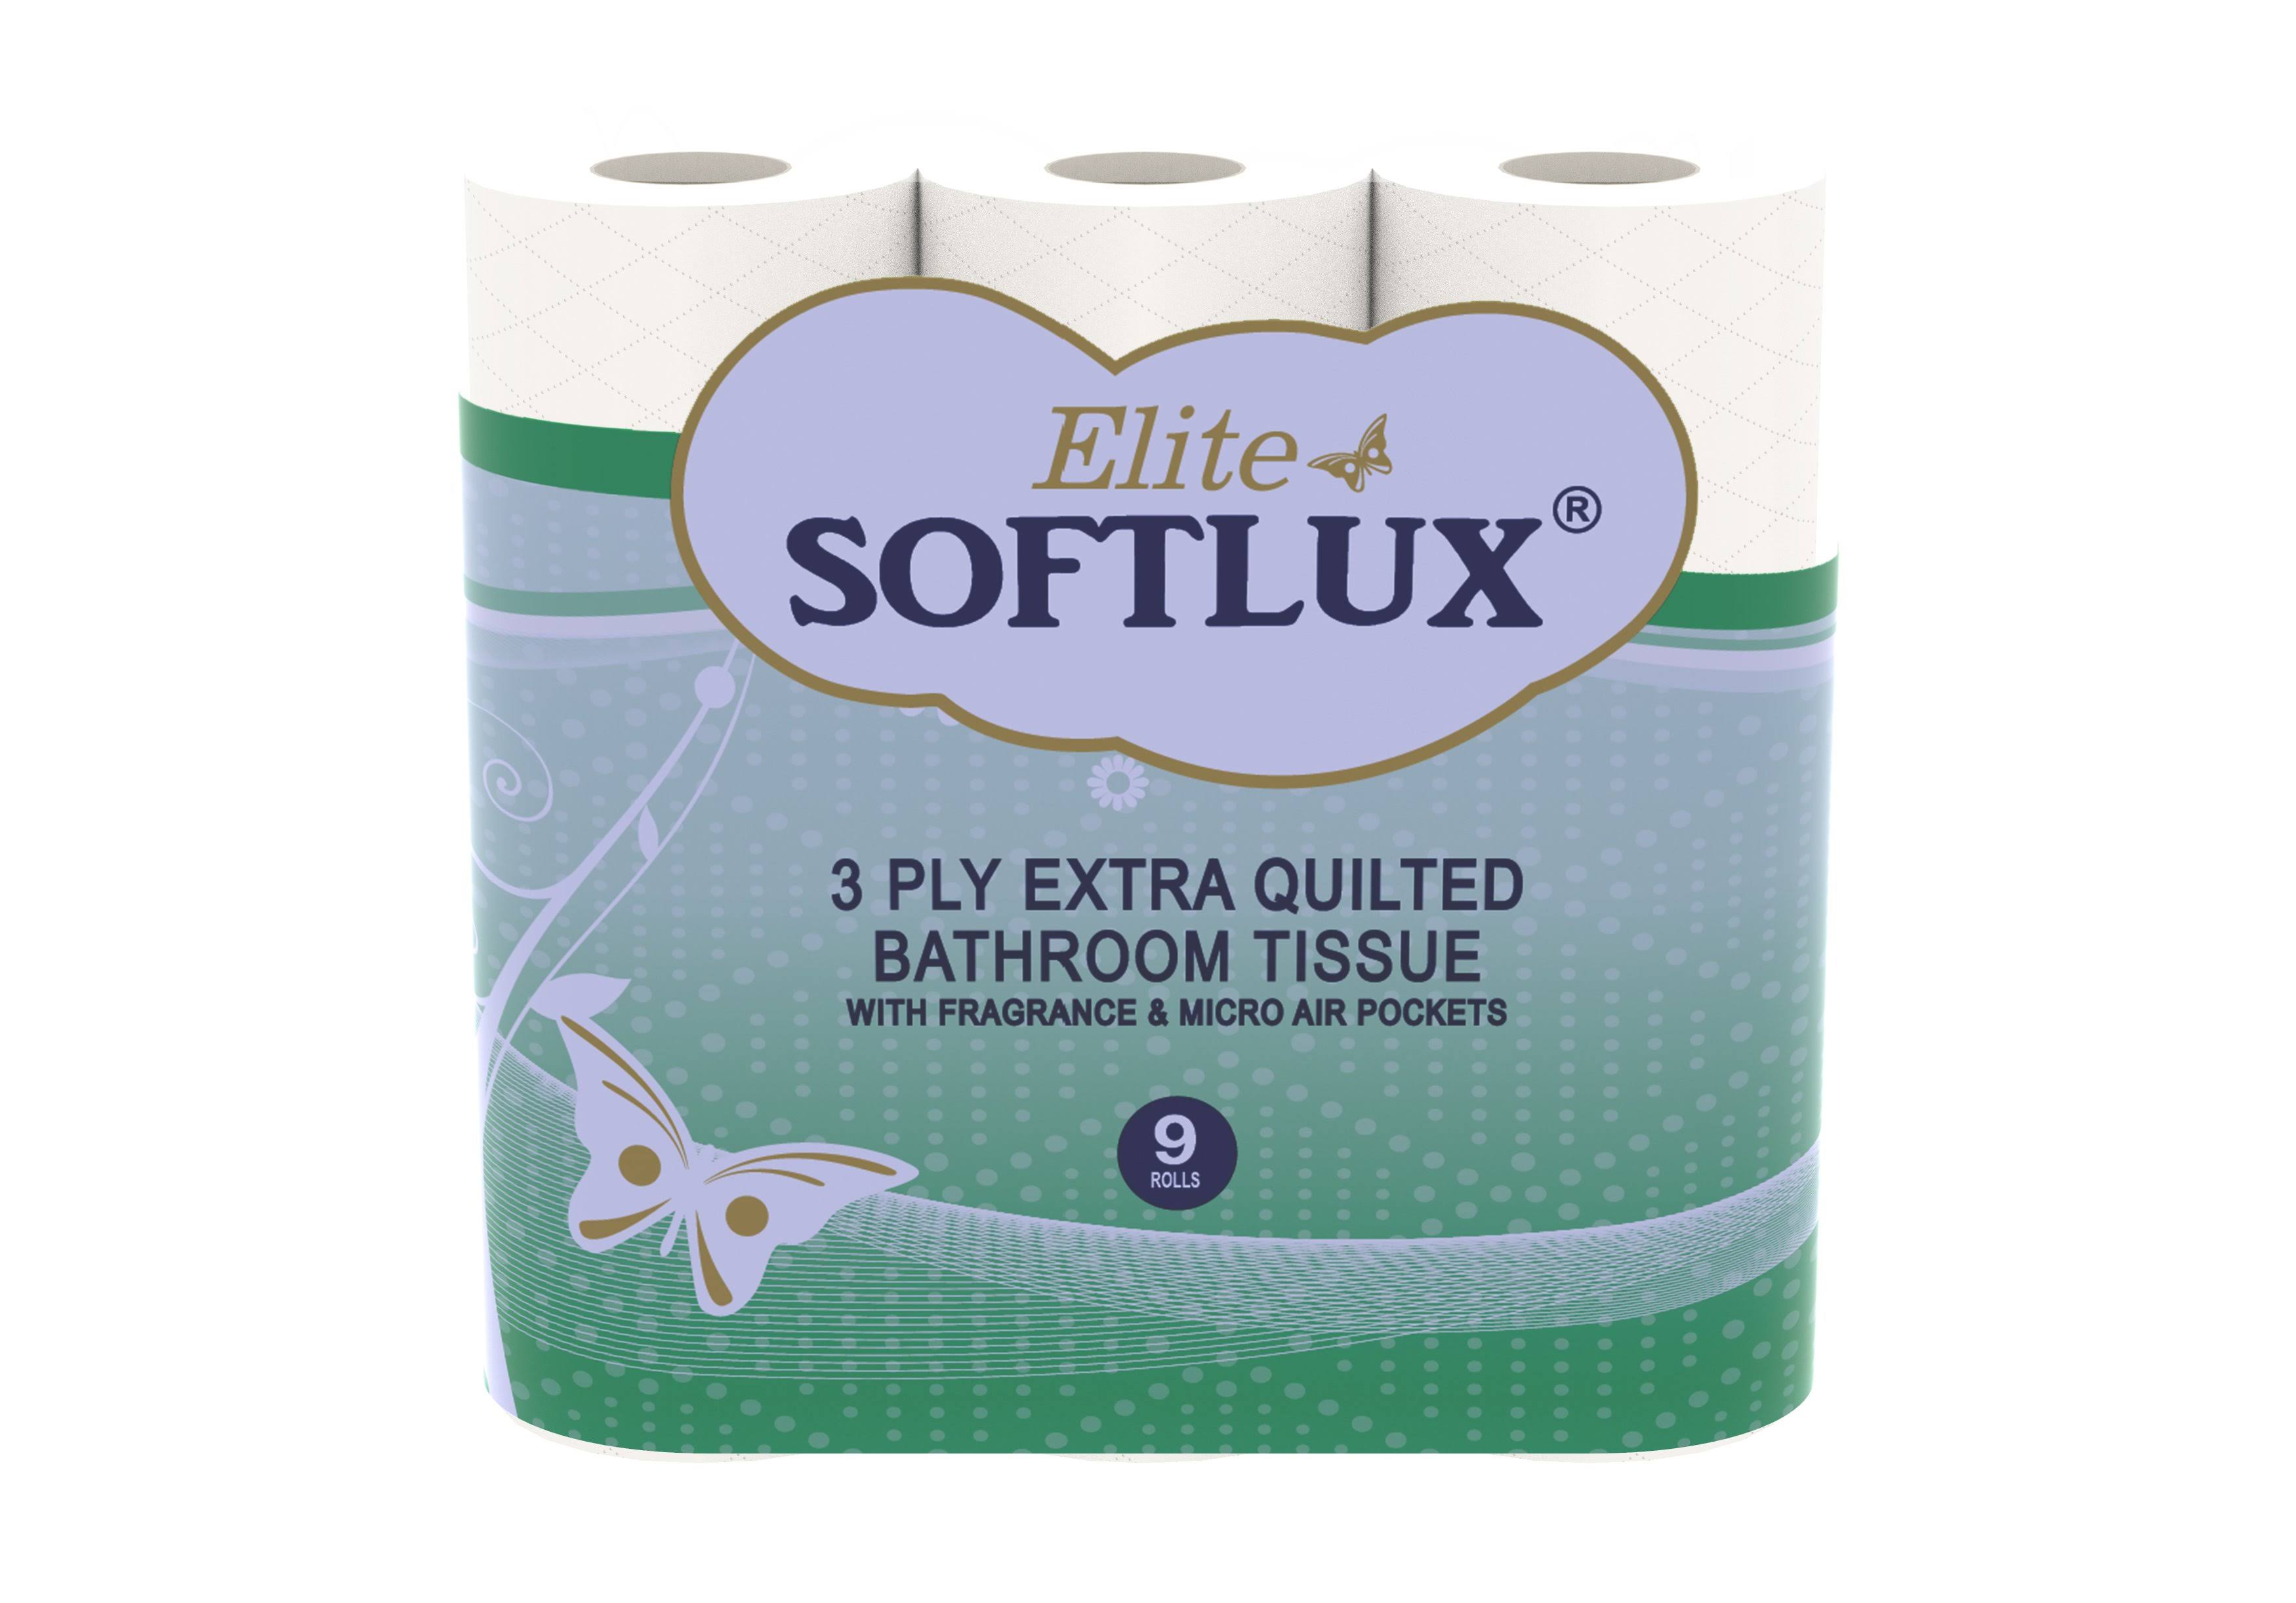 Elite Softlux 3 Ply Extra Quilted Bathroom Tissue - White, 9 Rolls